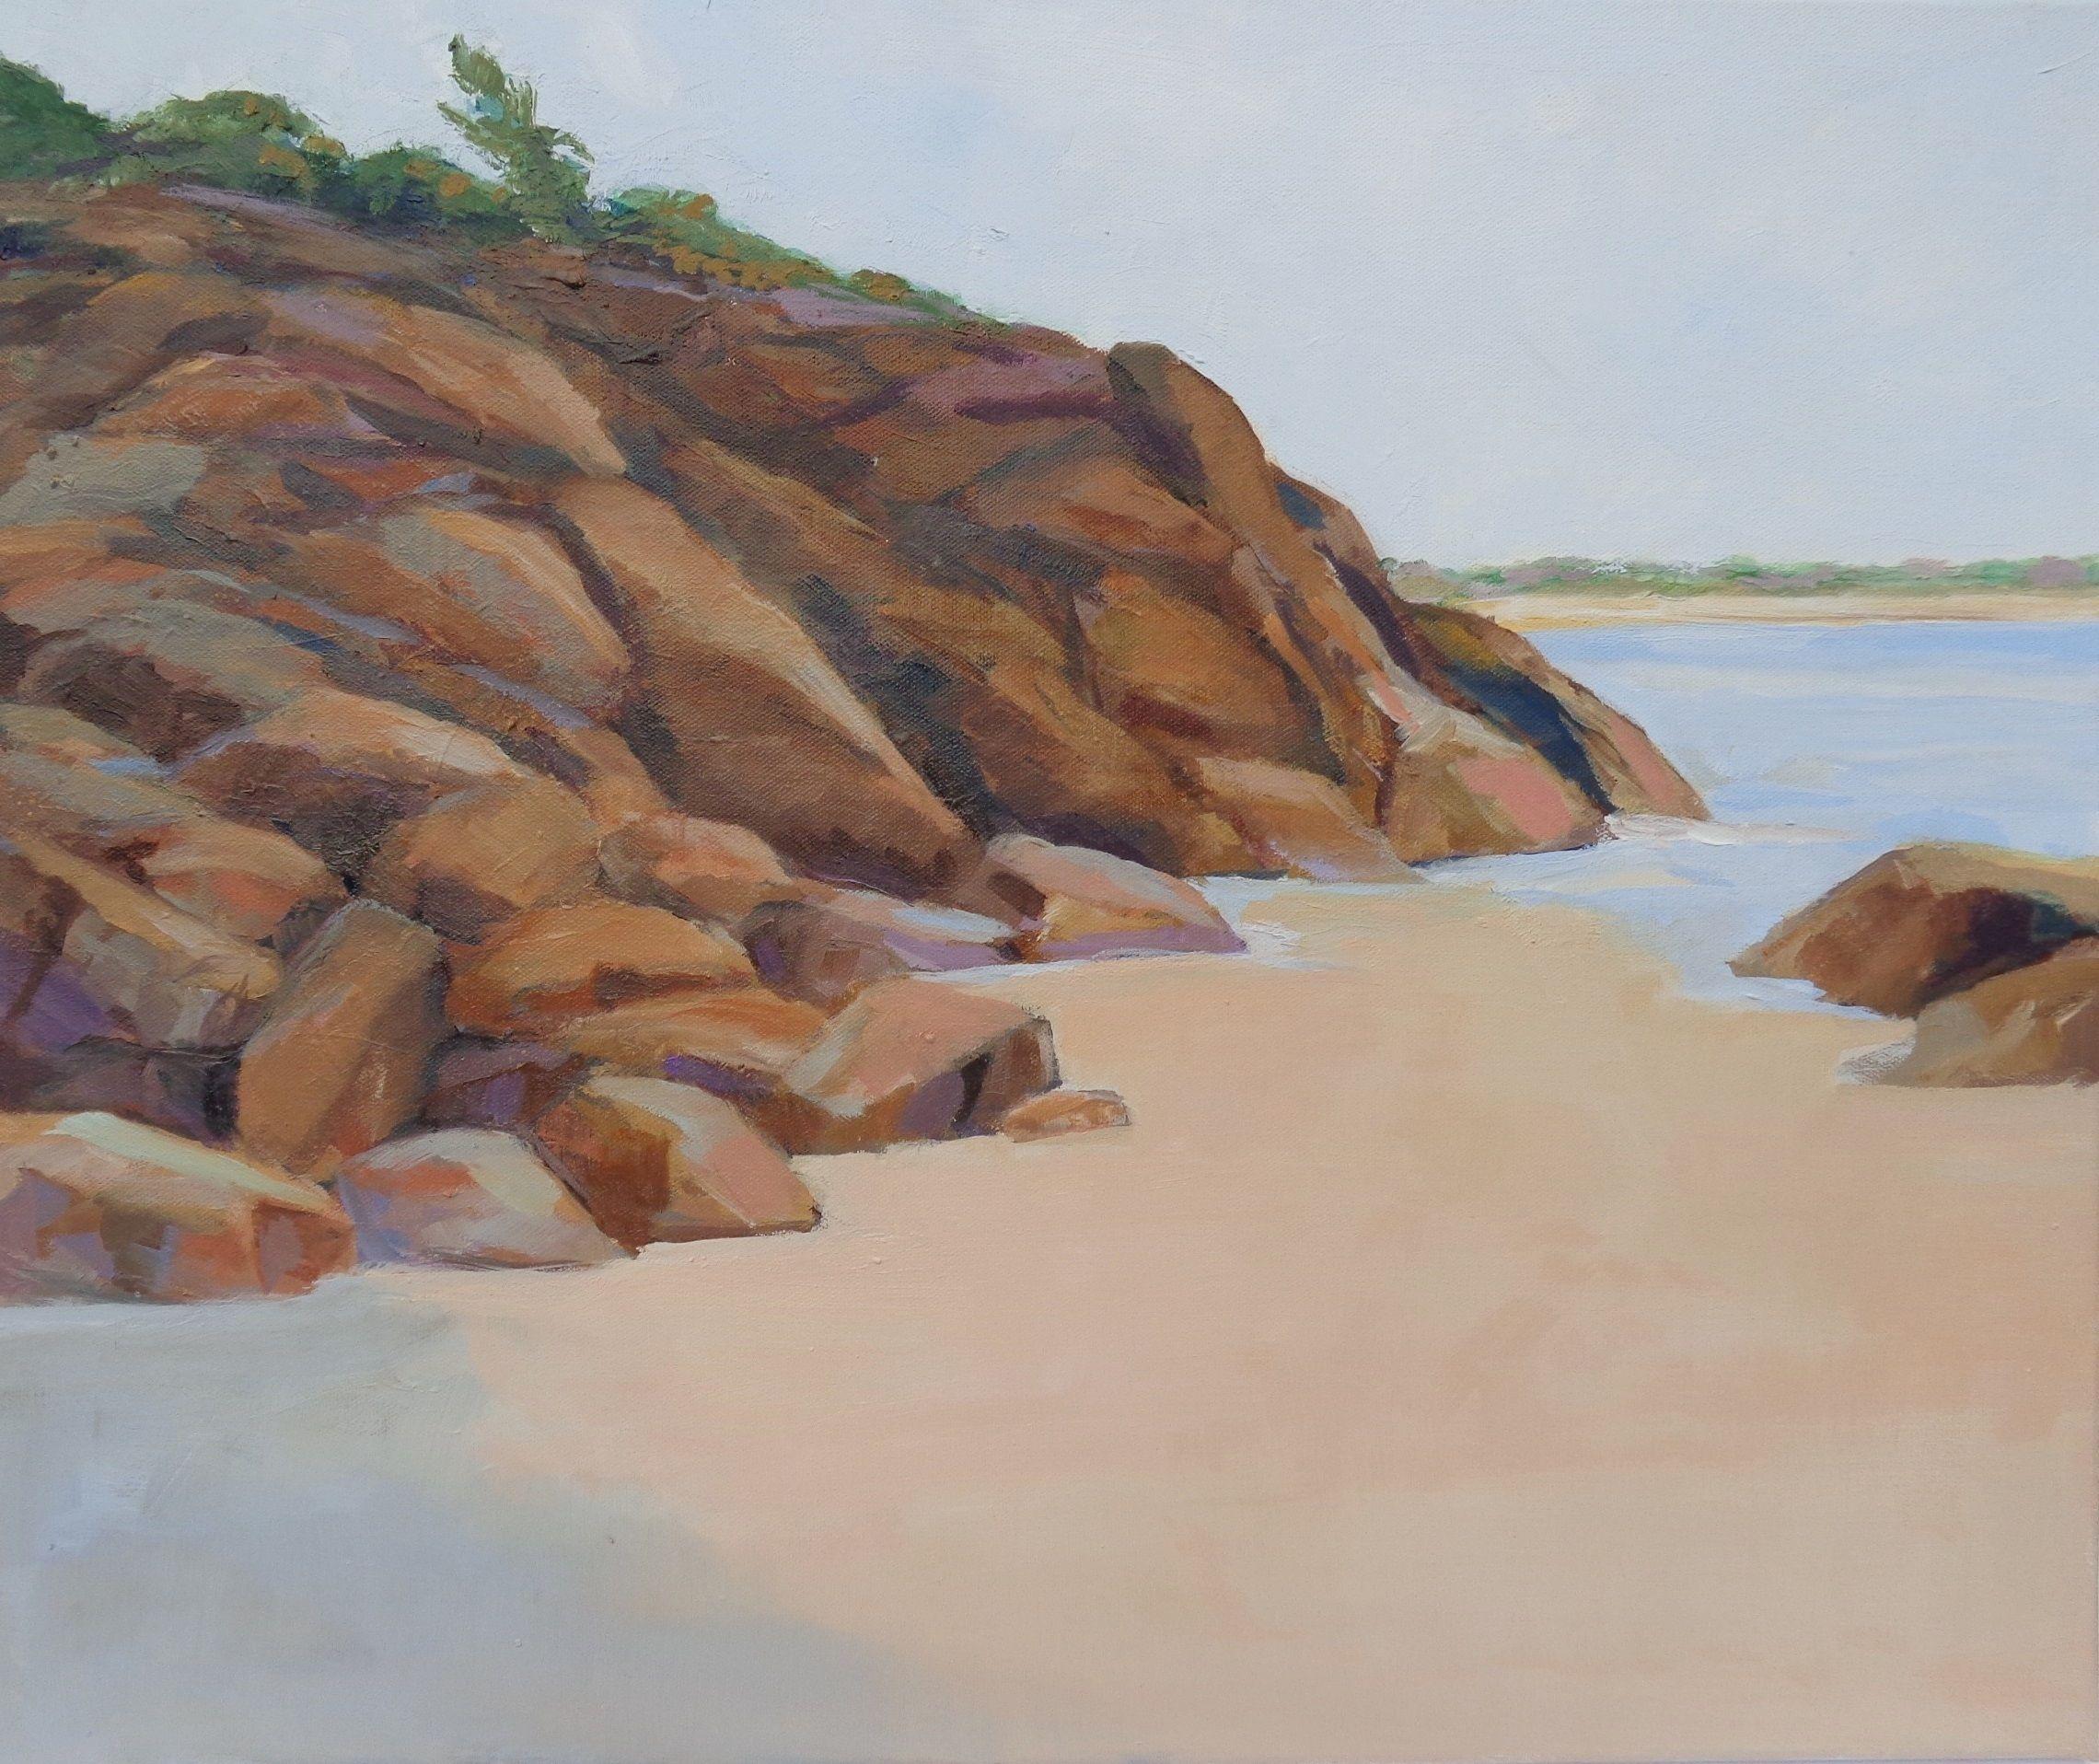 Only accessible at low tide, Little Beach has a quiet enduring presence. I worked to create this by the solidity of the cliffs, the open space of the beach, and the tones in the image. :: Painting :: Impressionist :: This piece comes with an